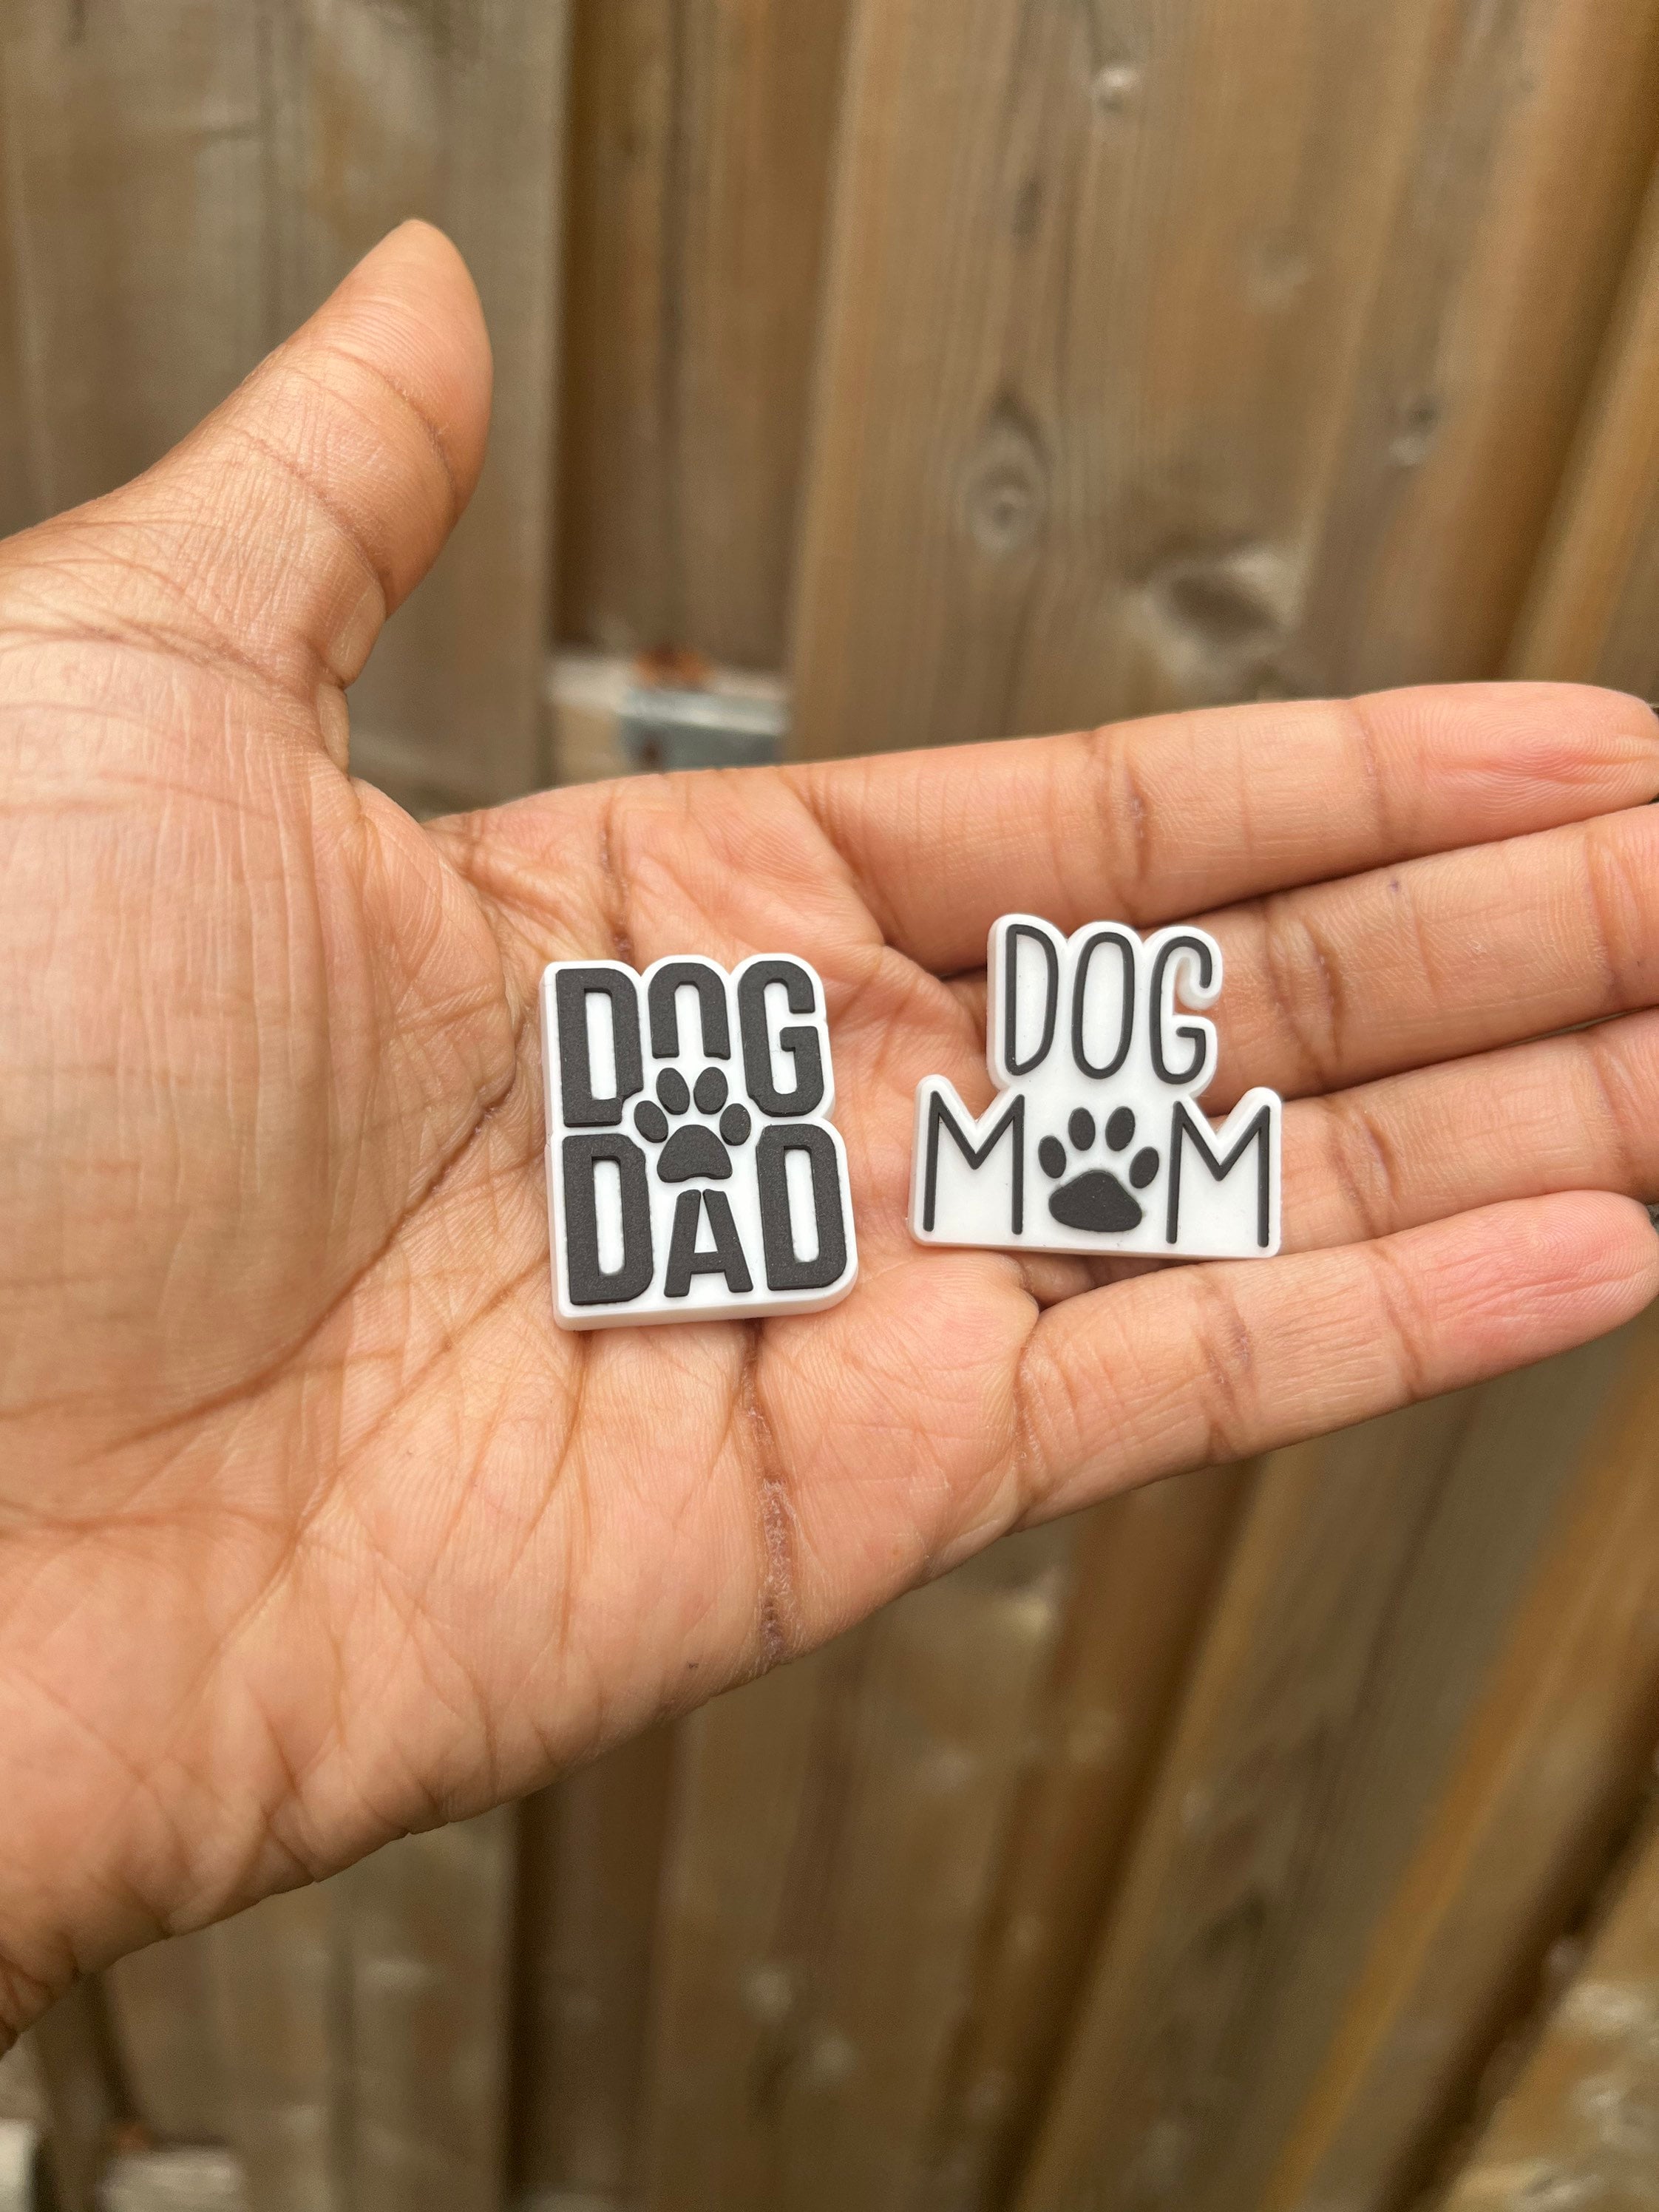 Dog Mom and Dog Dad Shoe Charms for Your Crocs, Dog Lover Trending